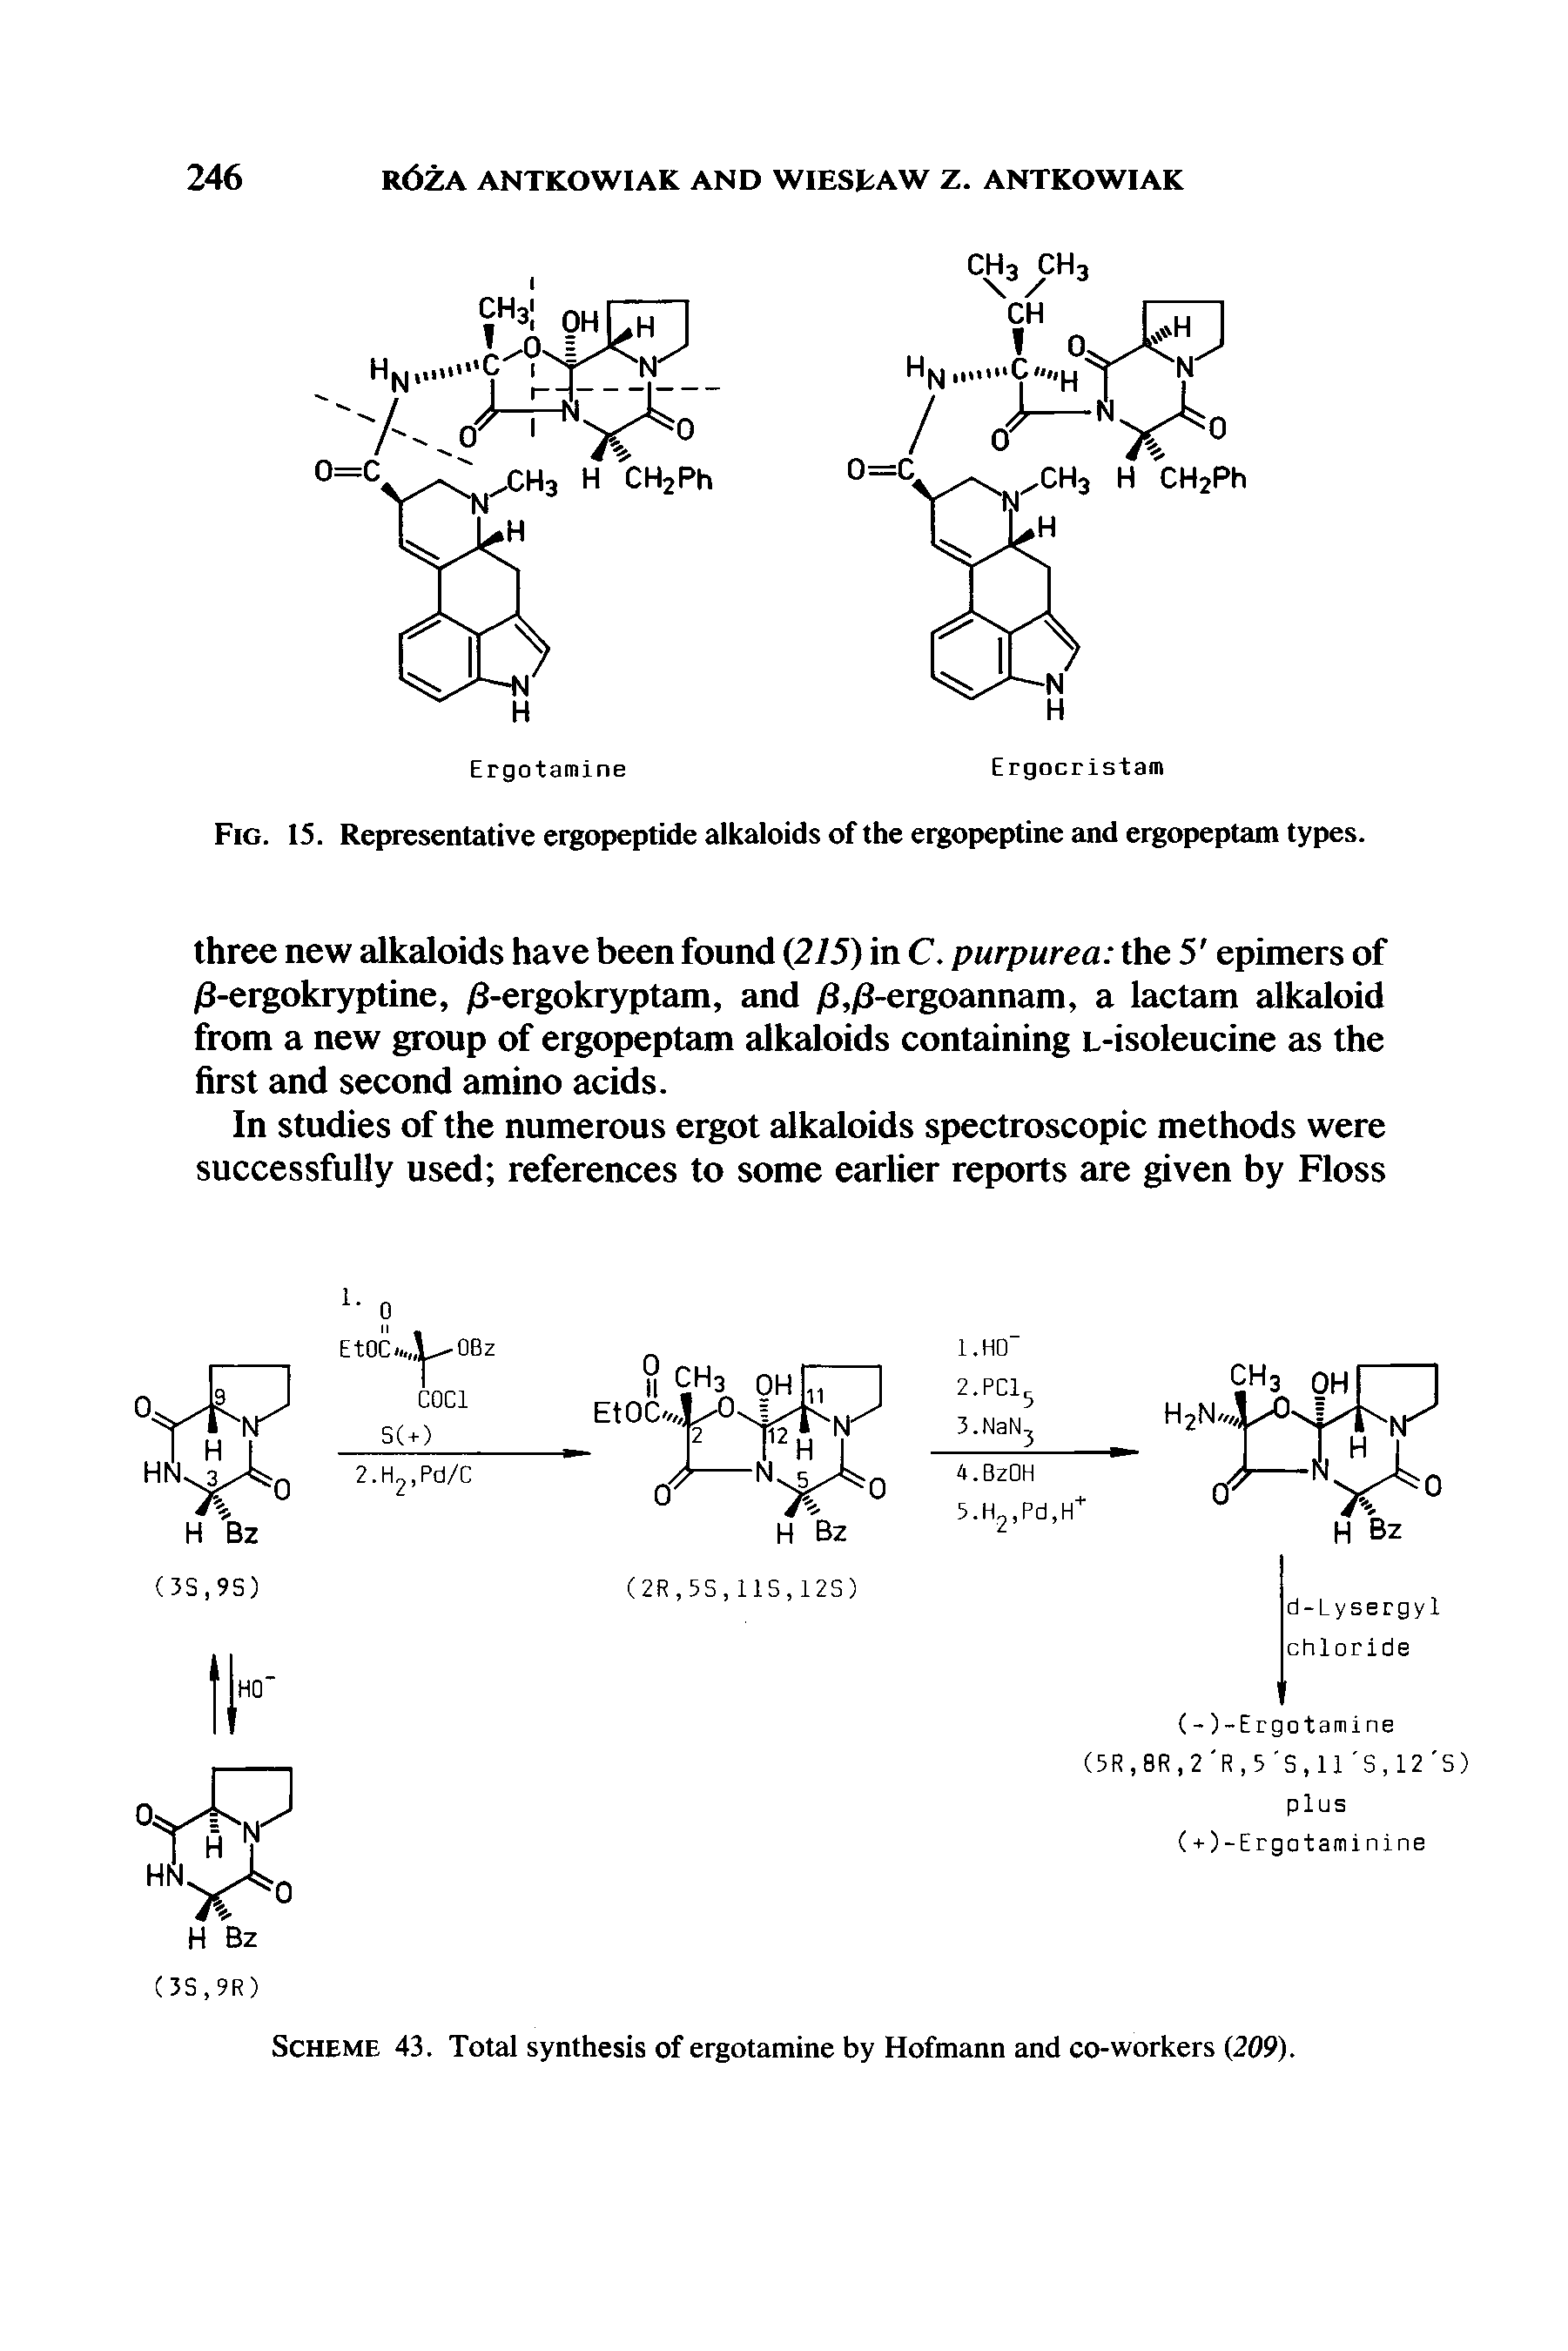 Scheme 43. Total synthesis of ergotamine by Hofmann and co-workers (209).